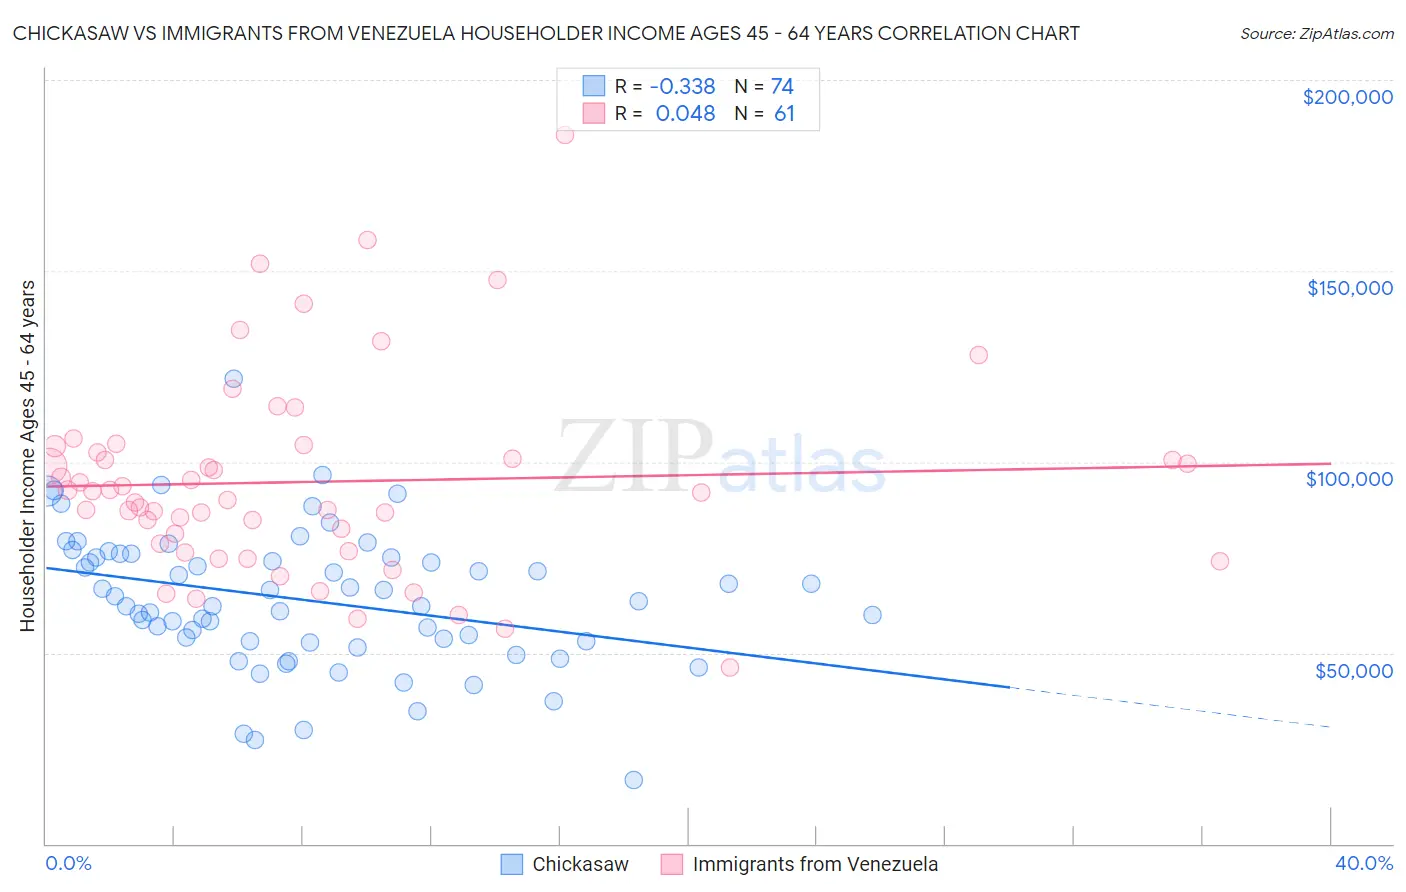 Chickasaw vs Immigrants from Venezuela Householder Income Ages 45 - 64 years